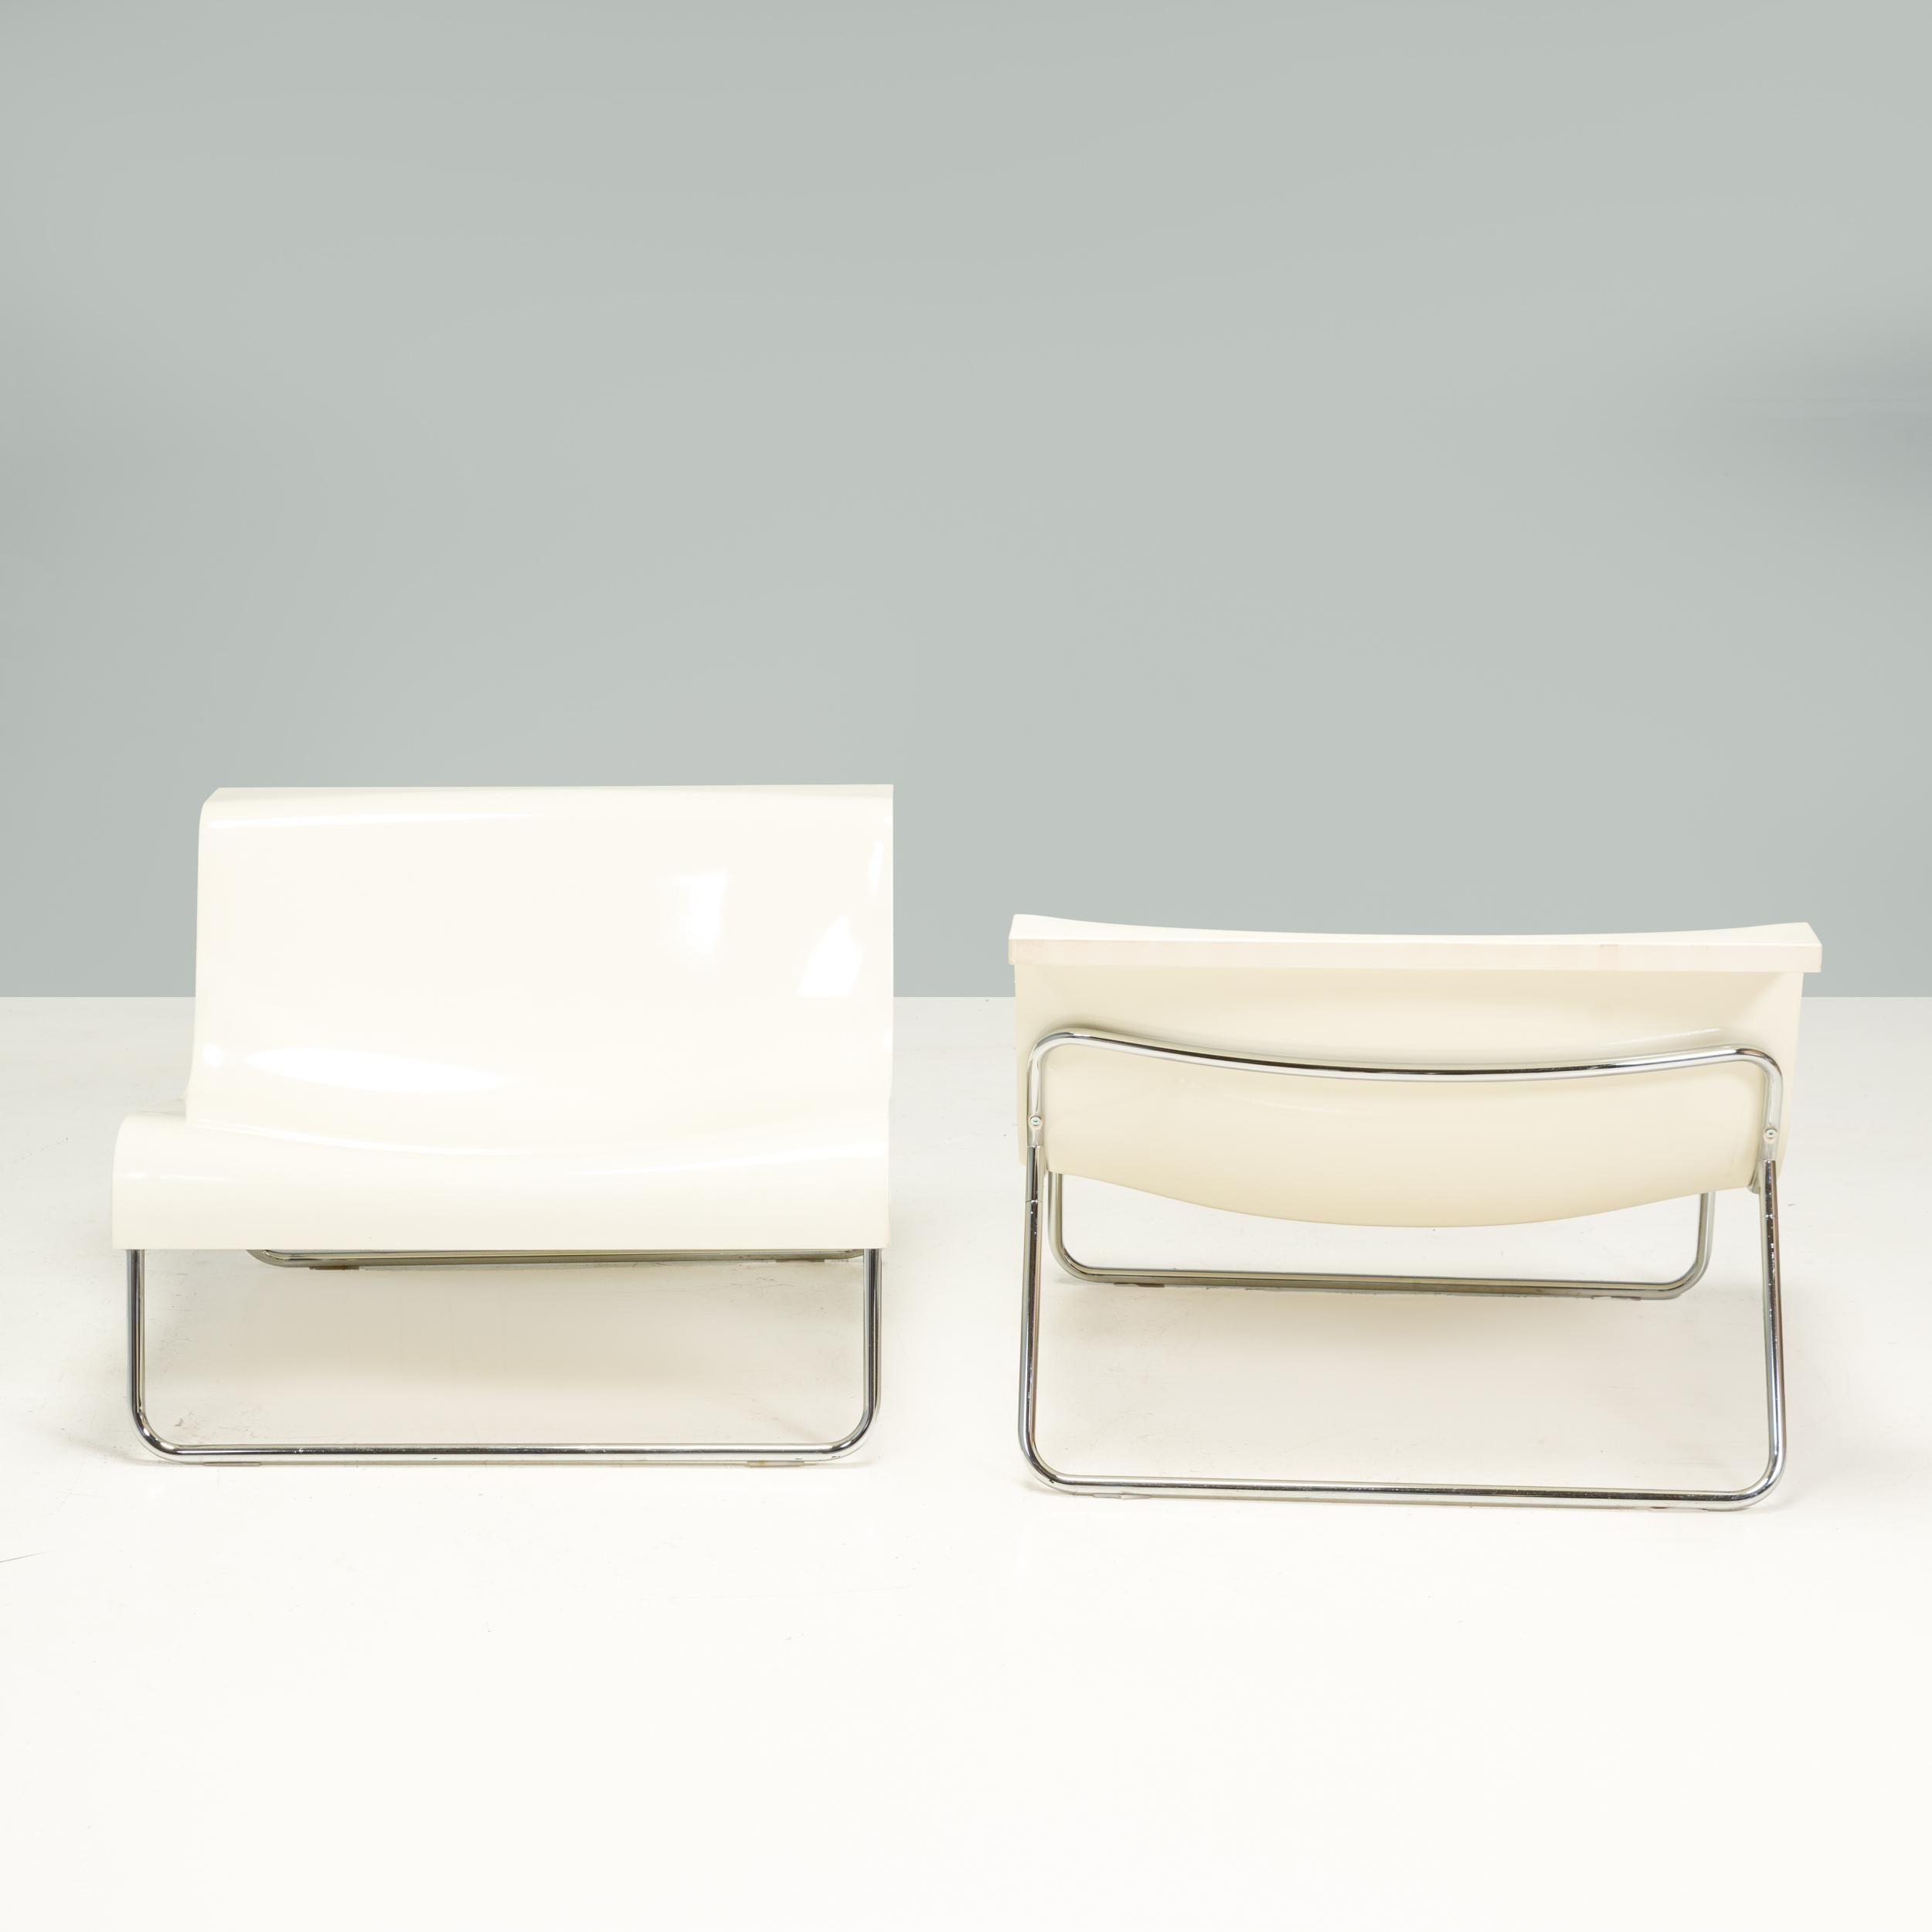 Originally designed by Italian architect Piero Lissoni for Kartell in the 1990s, the Form chair is a fantastic example of the 90s minimalist design aesthetic.

Constructed from sheets of moulded white polyurethane, the chairs have a wide, ergonomic